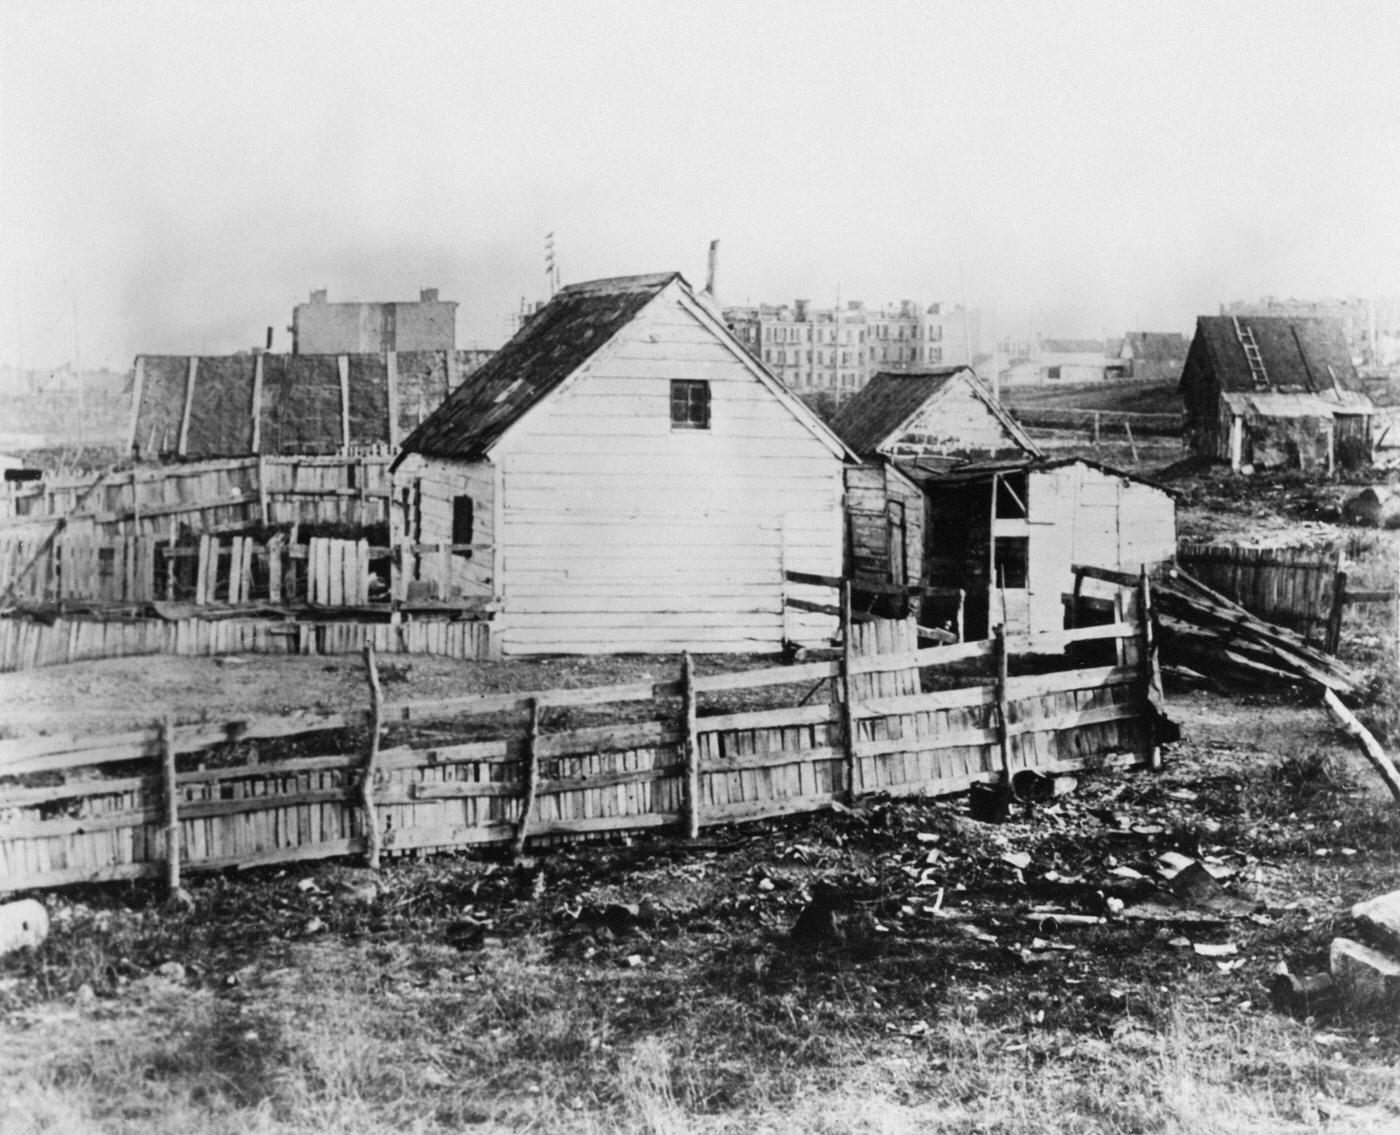 Wood-Built Property At 98Th Street And Fifth Avenue In East Harlem, Upper Manhattan, New York City, 1888